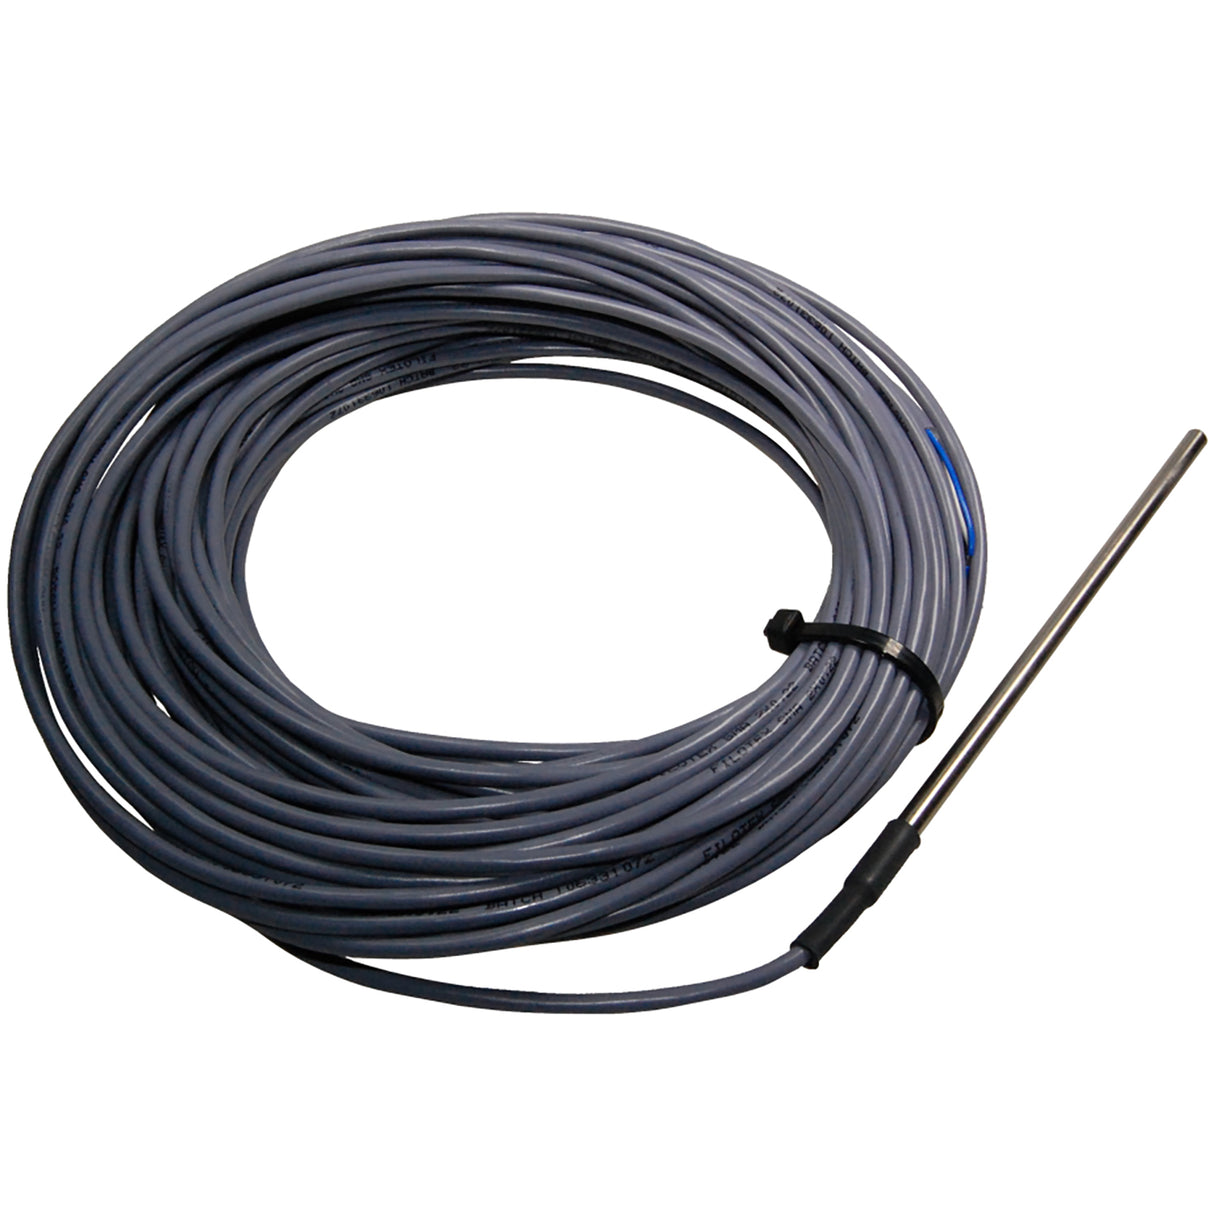 Manuflow Reed Contact With Cable